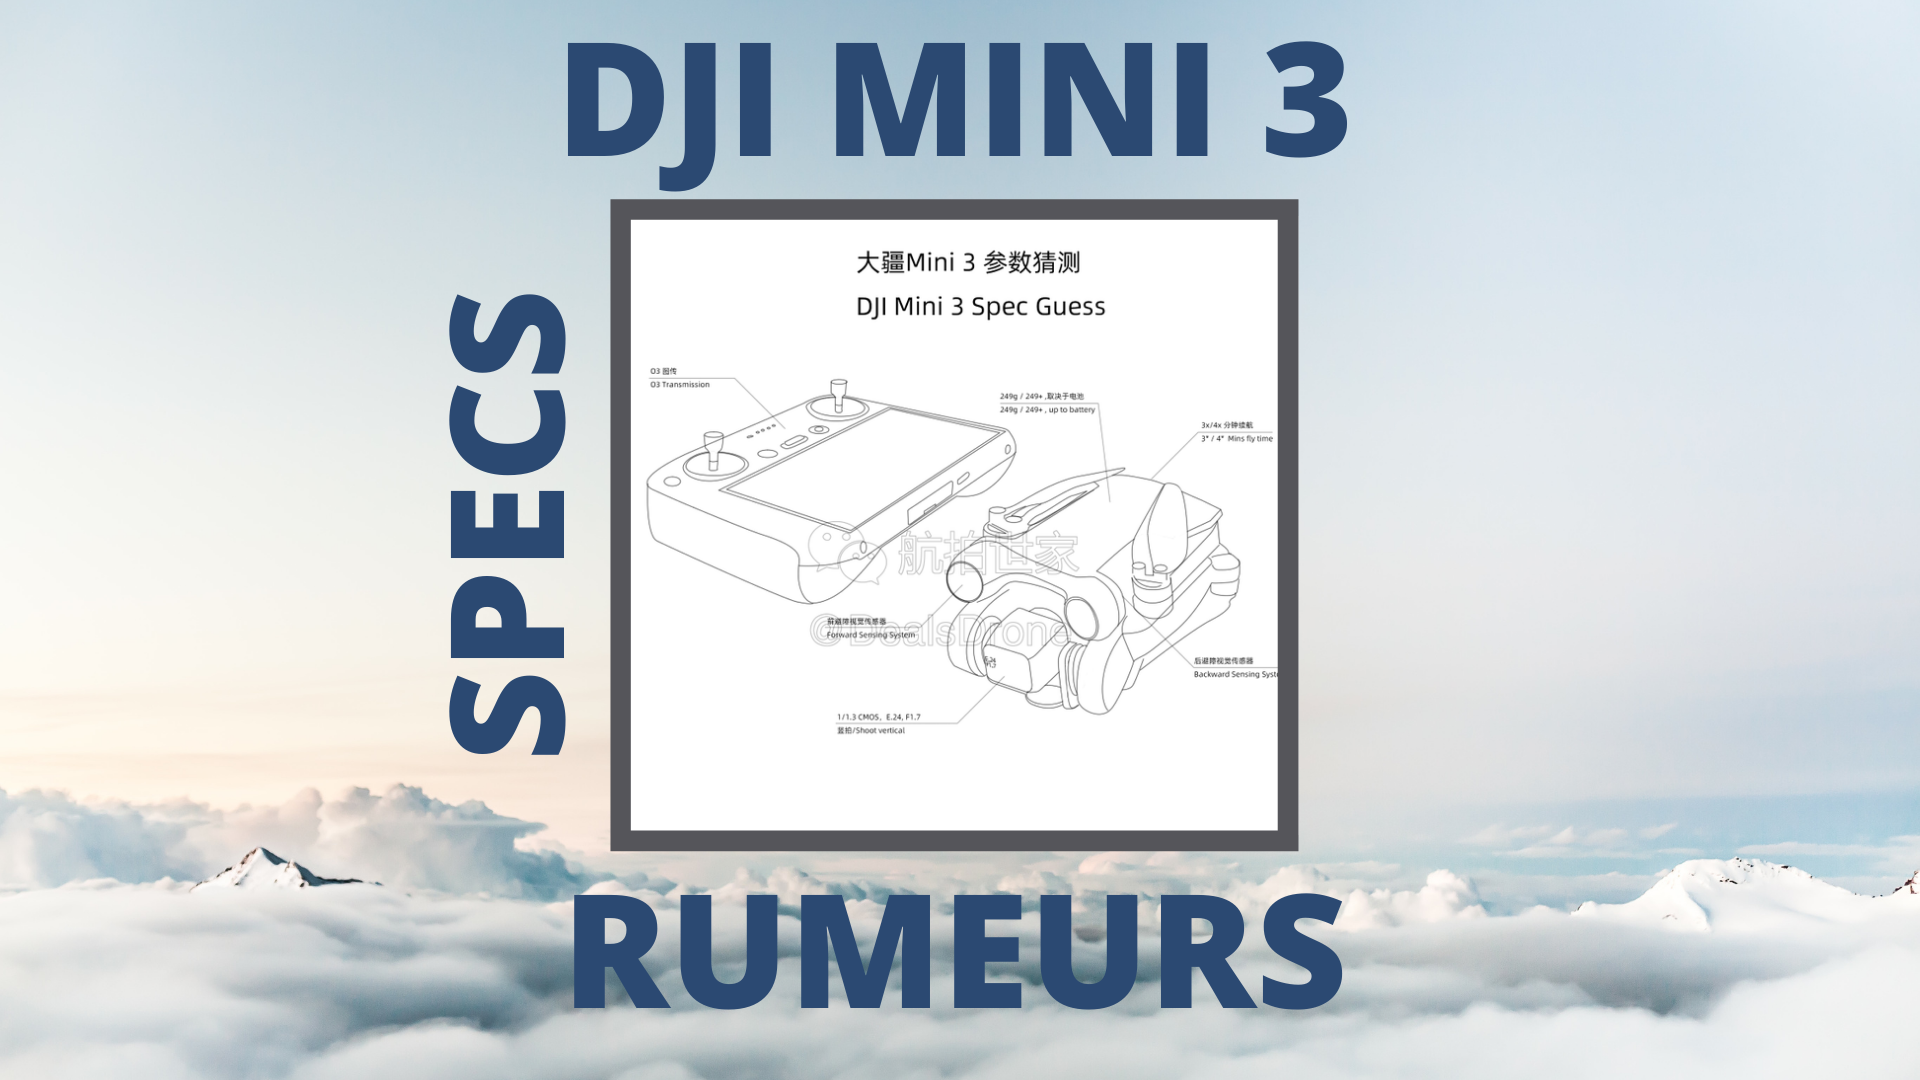 You are currently viewing [RUMEURS] DJI MINI 3 – Spécifications